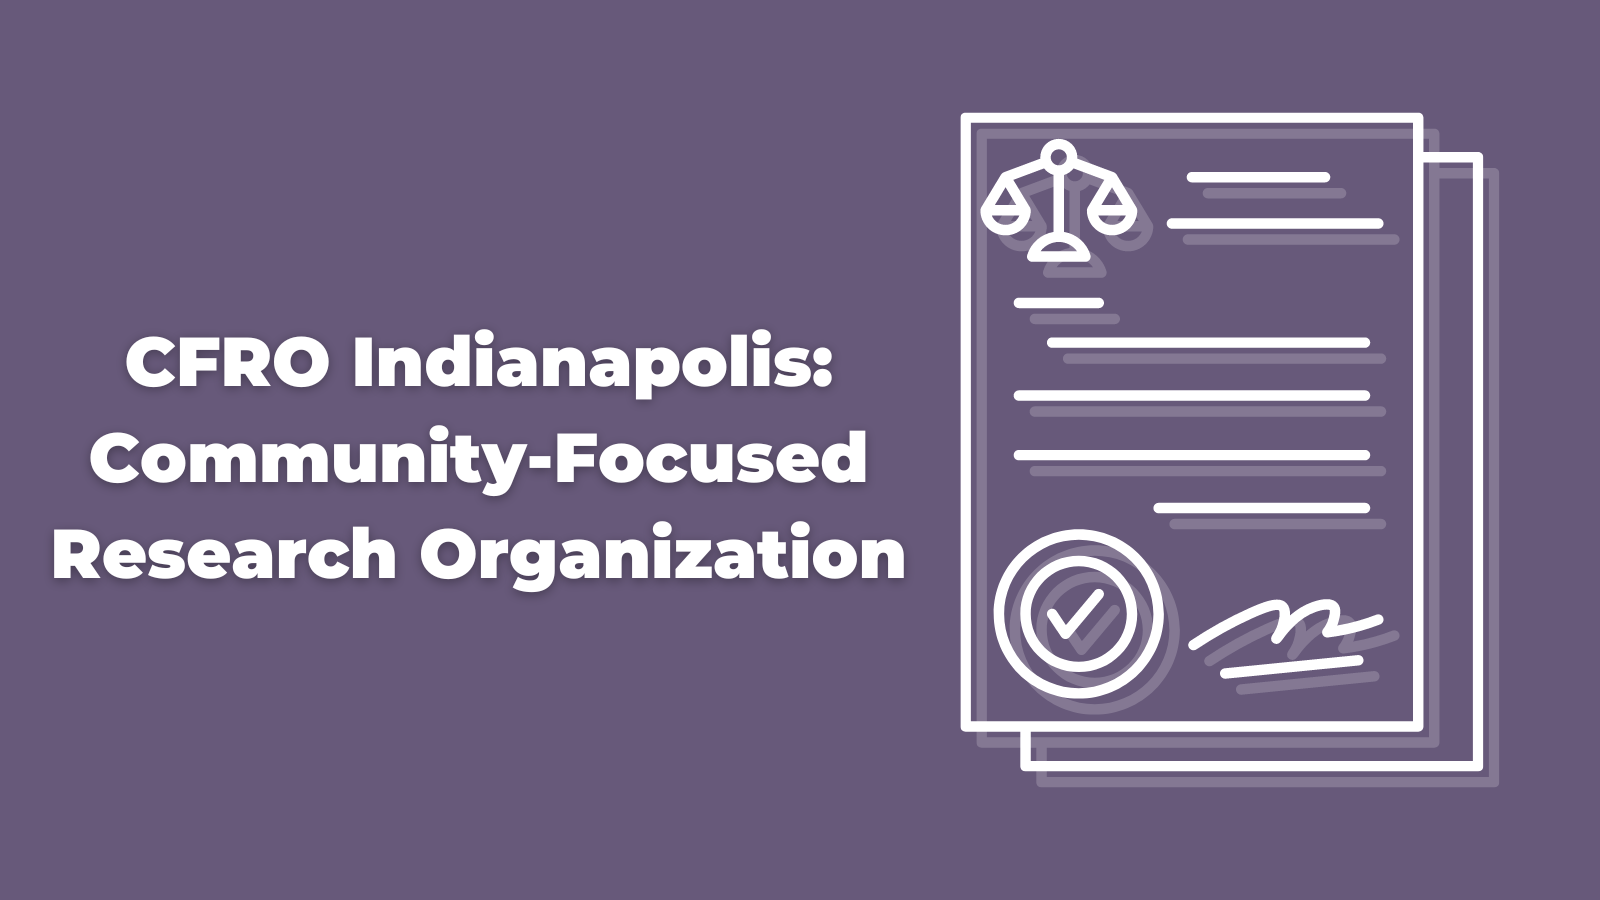 CFRO Indianapolis: Community Focused Research Organization